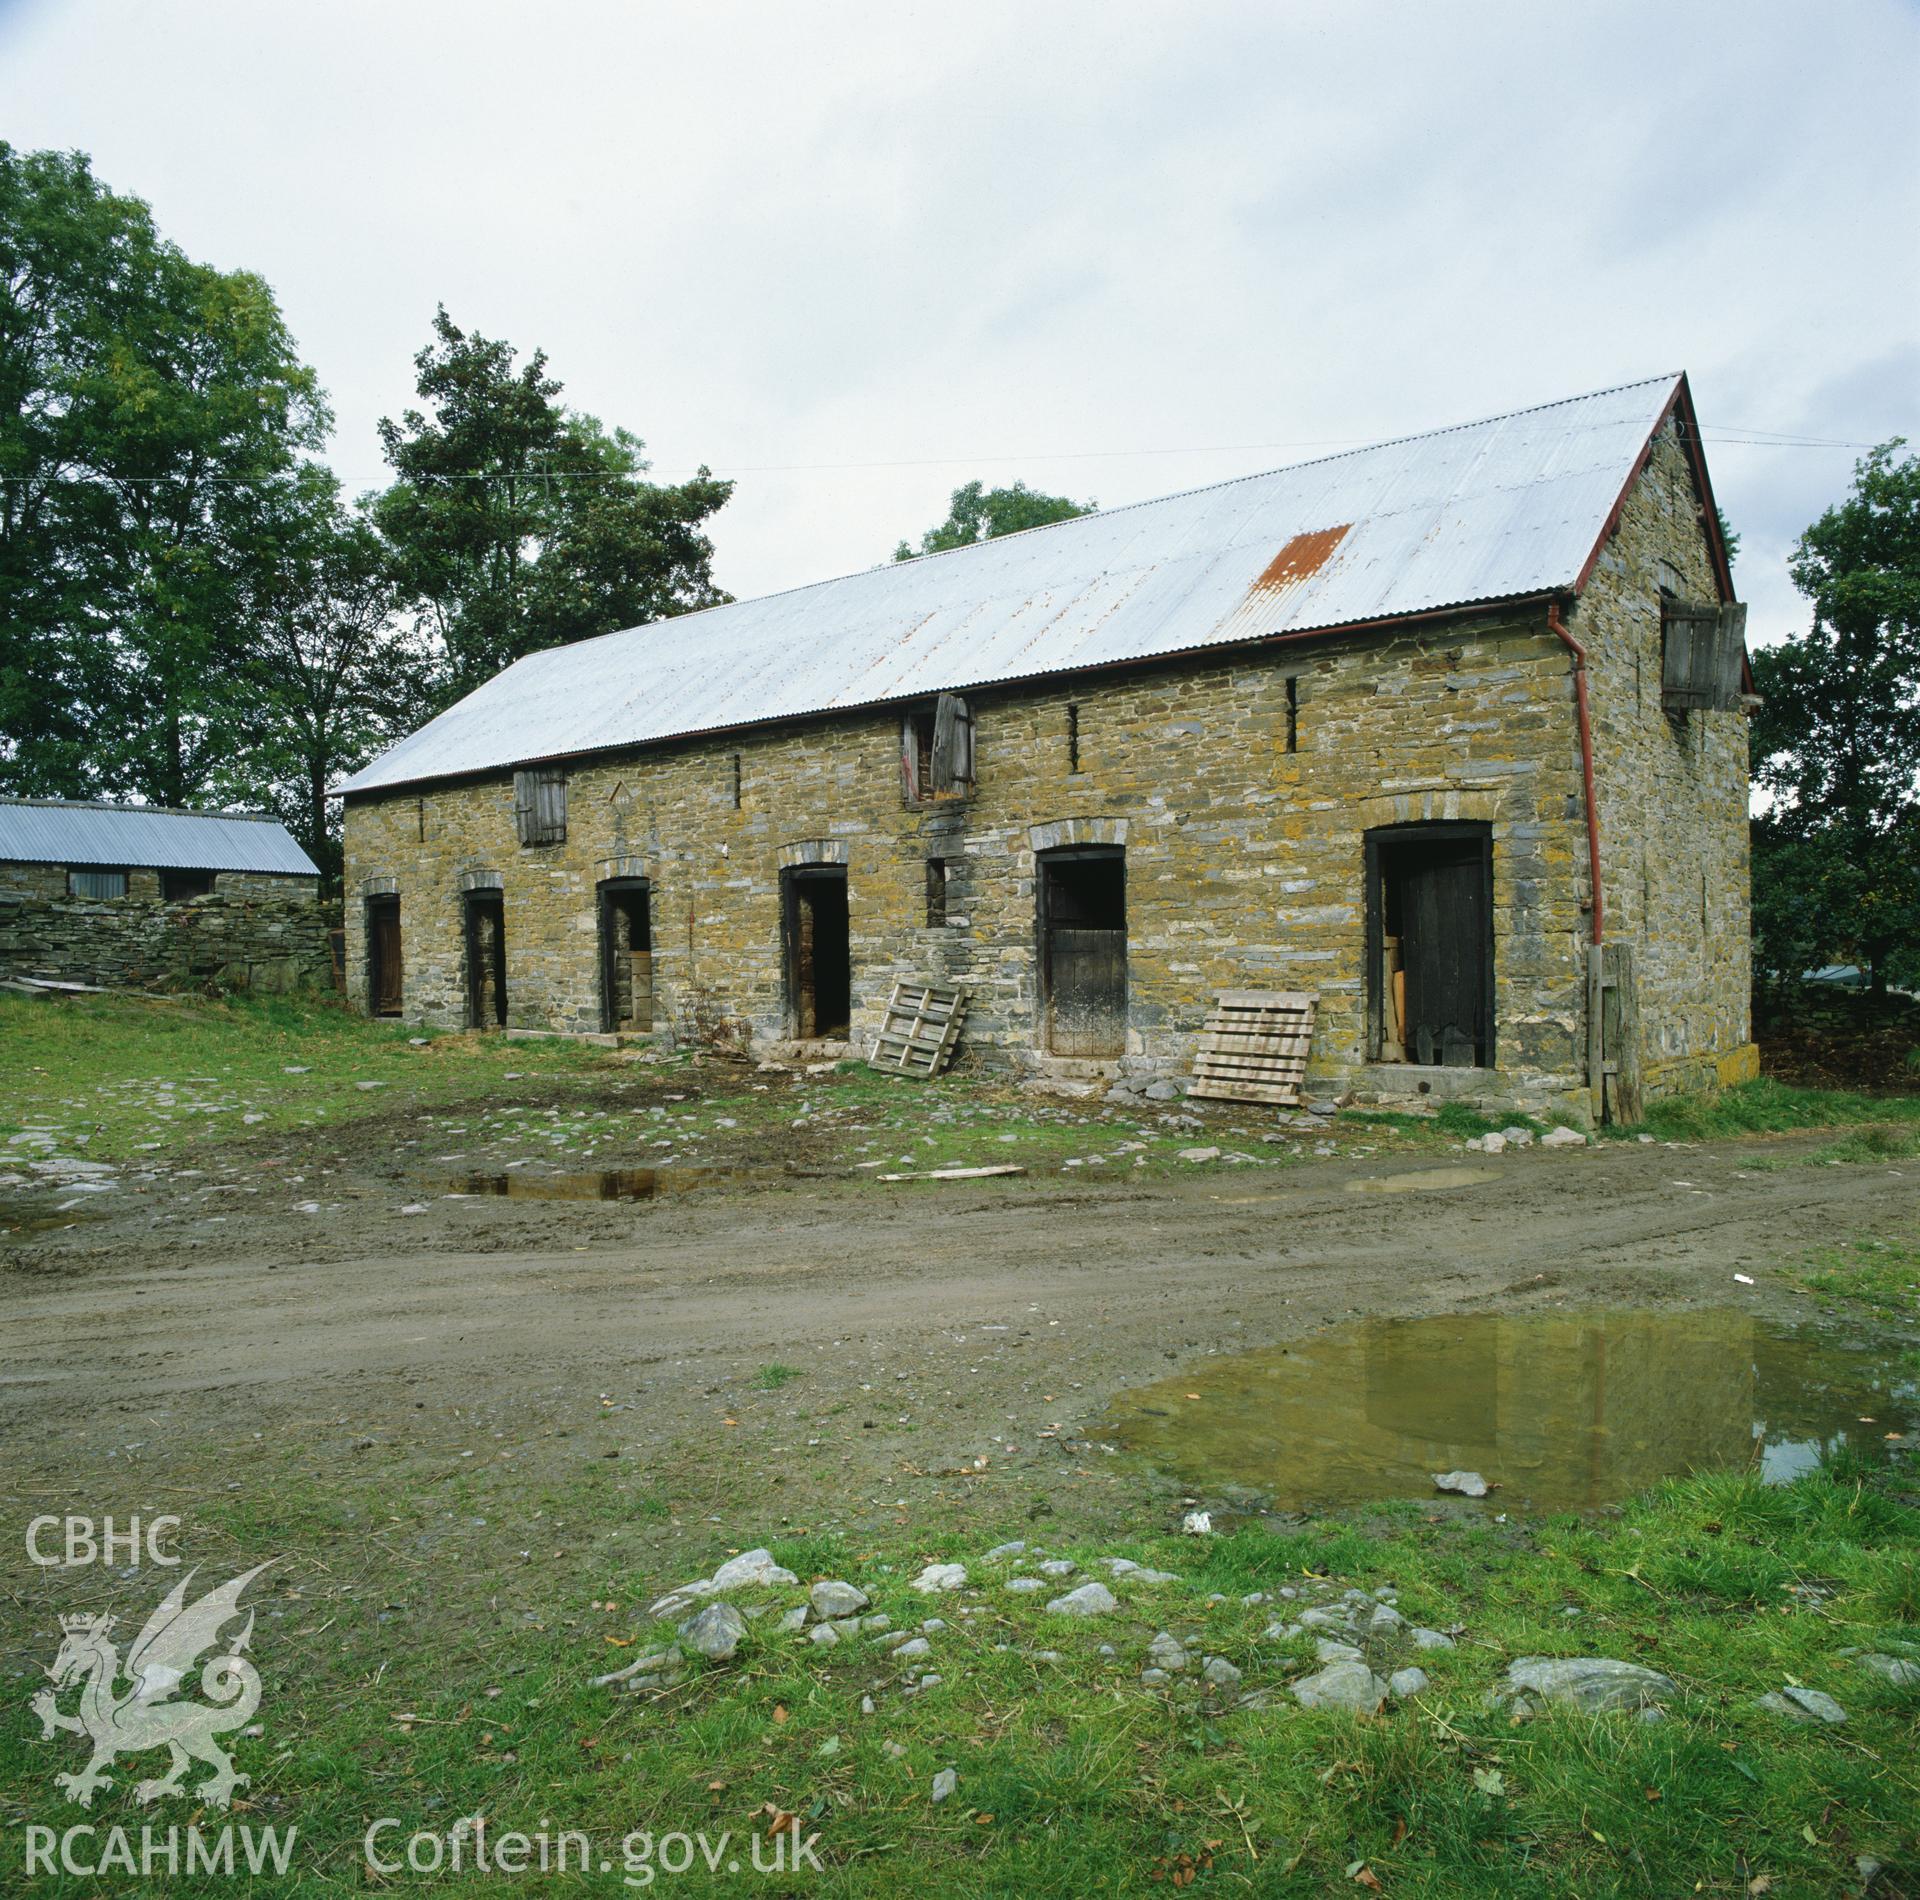 RCAHMW colour transparency showing the barn at Lower Nantserth Farm.